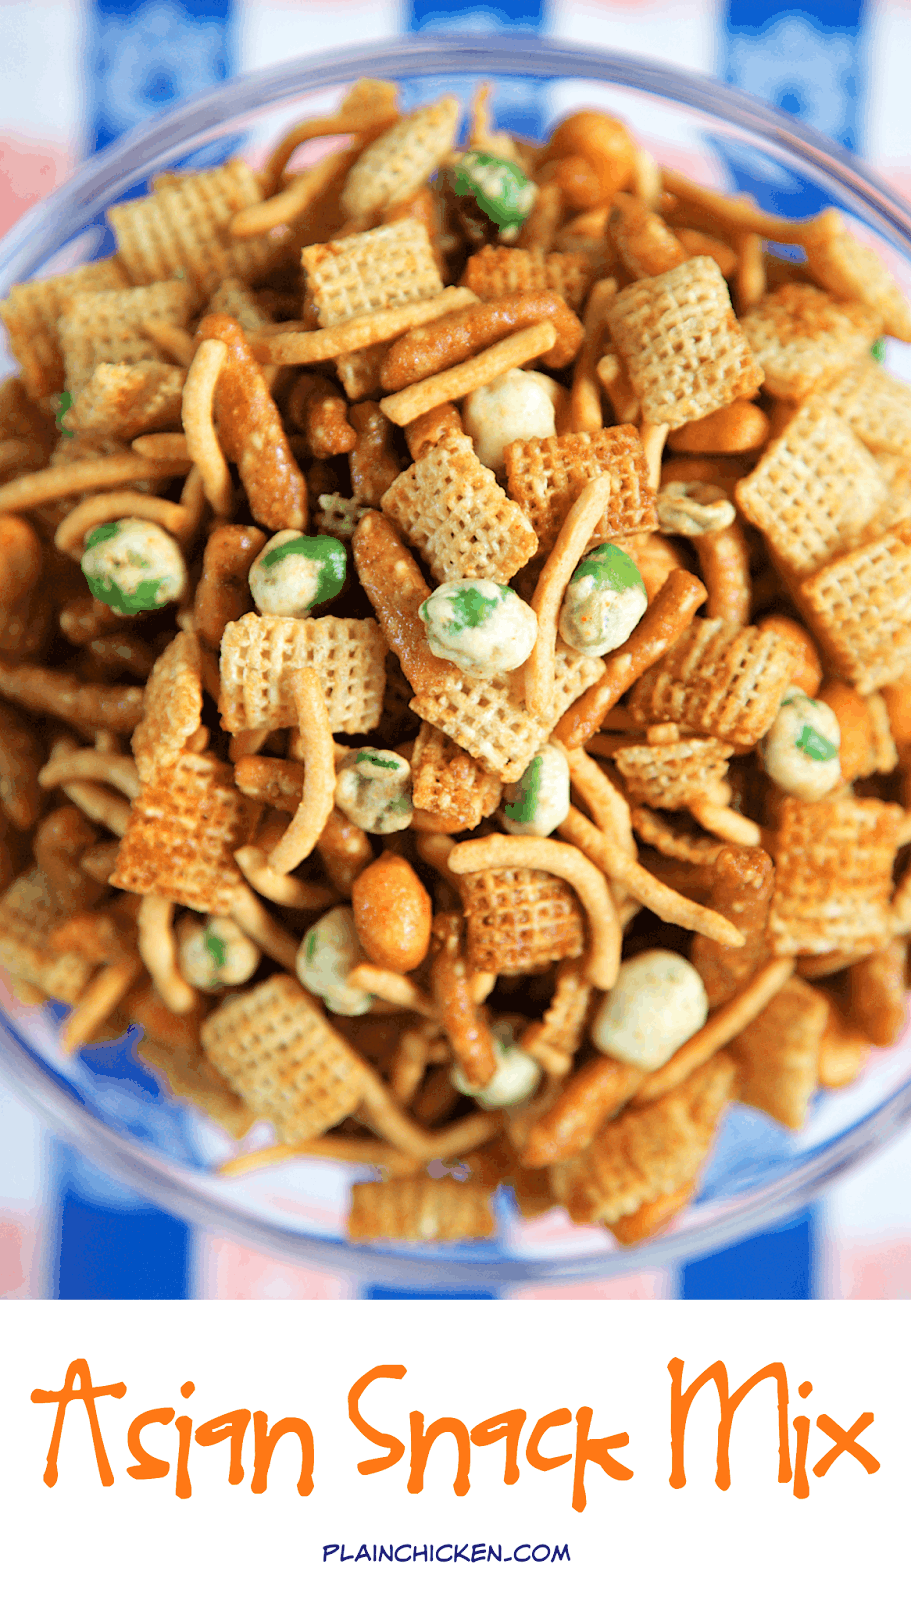 Asian Snack Mix - rice chex, sesame sticks, wasabi peas, chow mein noodles, honey roasted peanuts tossed in butter, soy sauce, ginger, garlic and cayenne - this stuff is crazy addictive! Can make ahead of time - it keeps for a week. Always the first thing to go at parties! Everyone asks for the recipe!